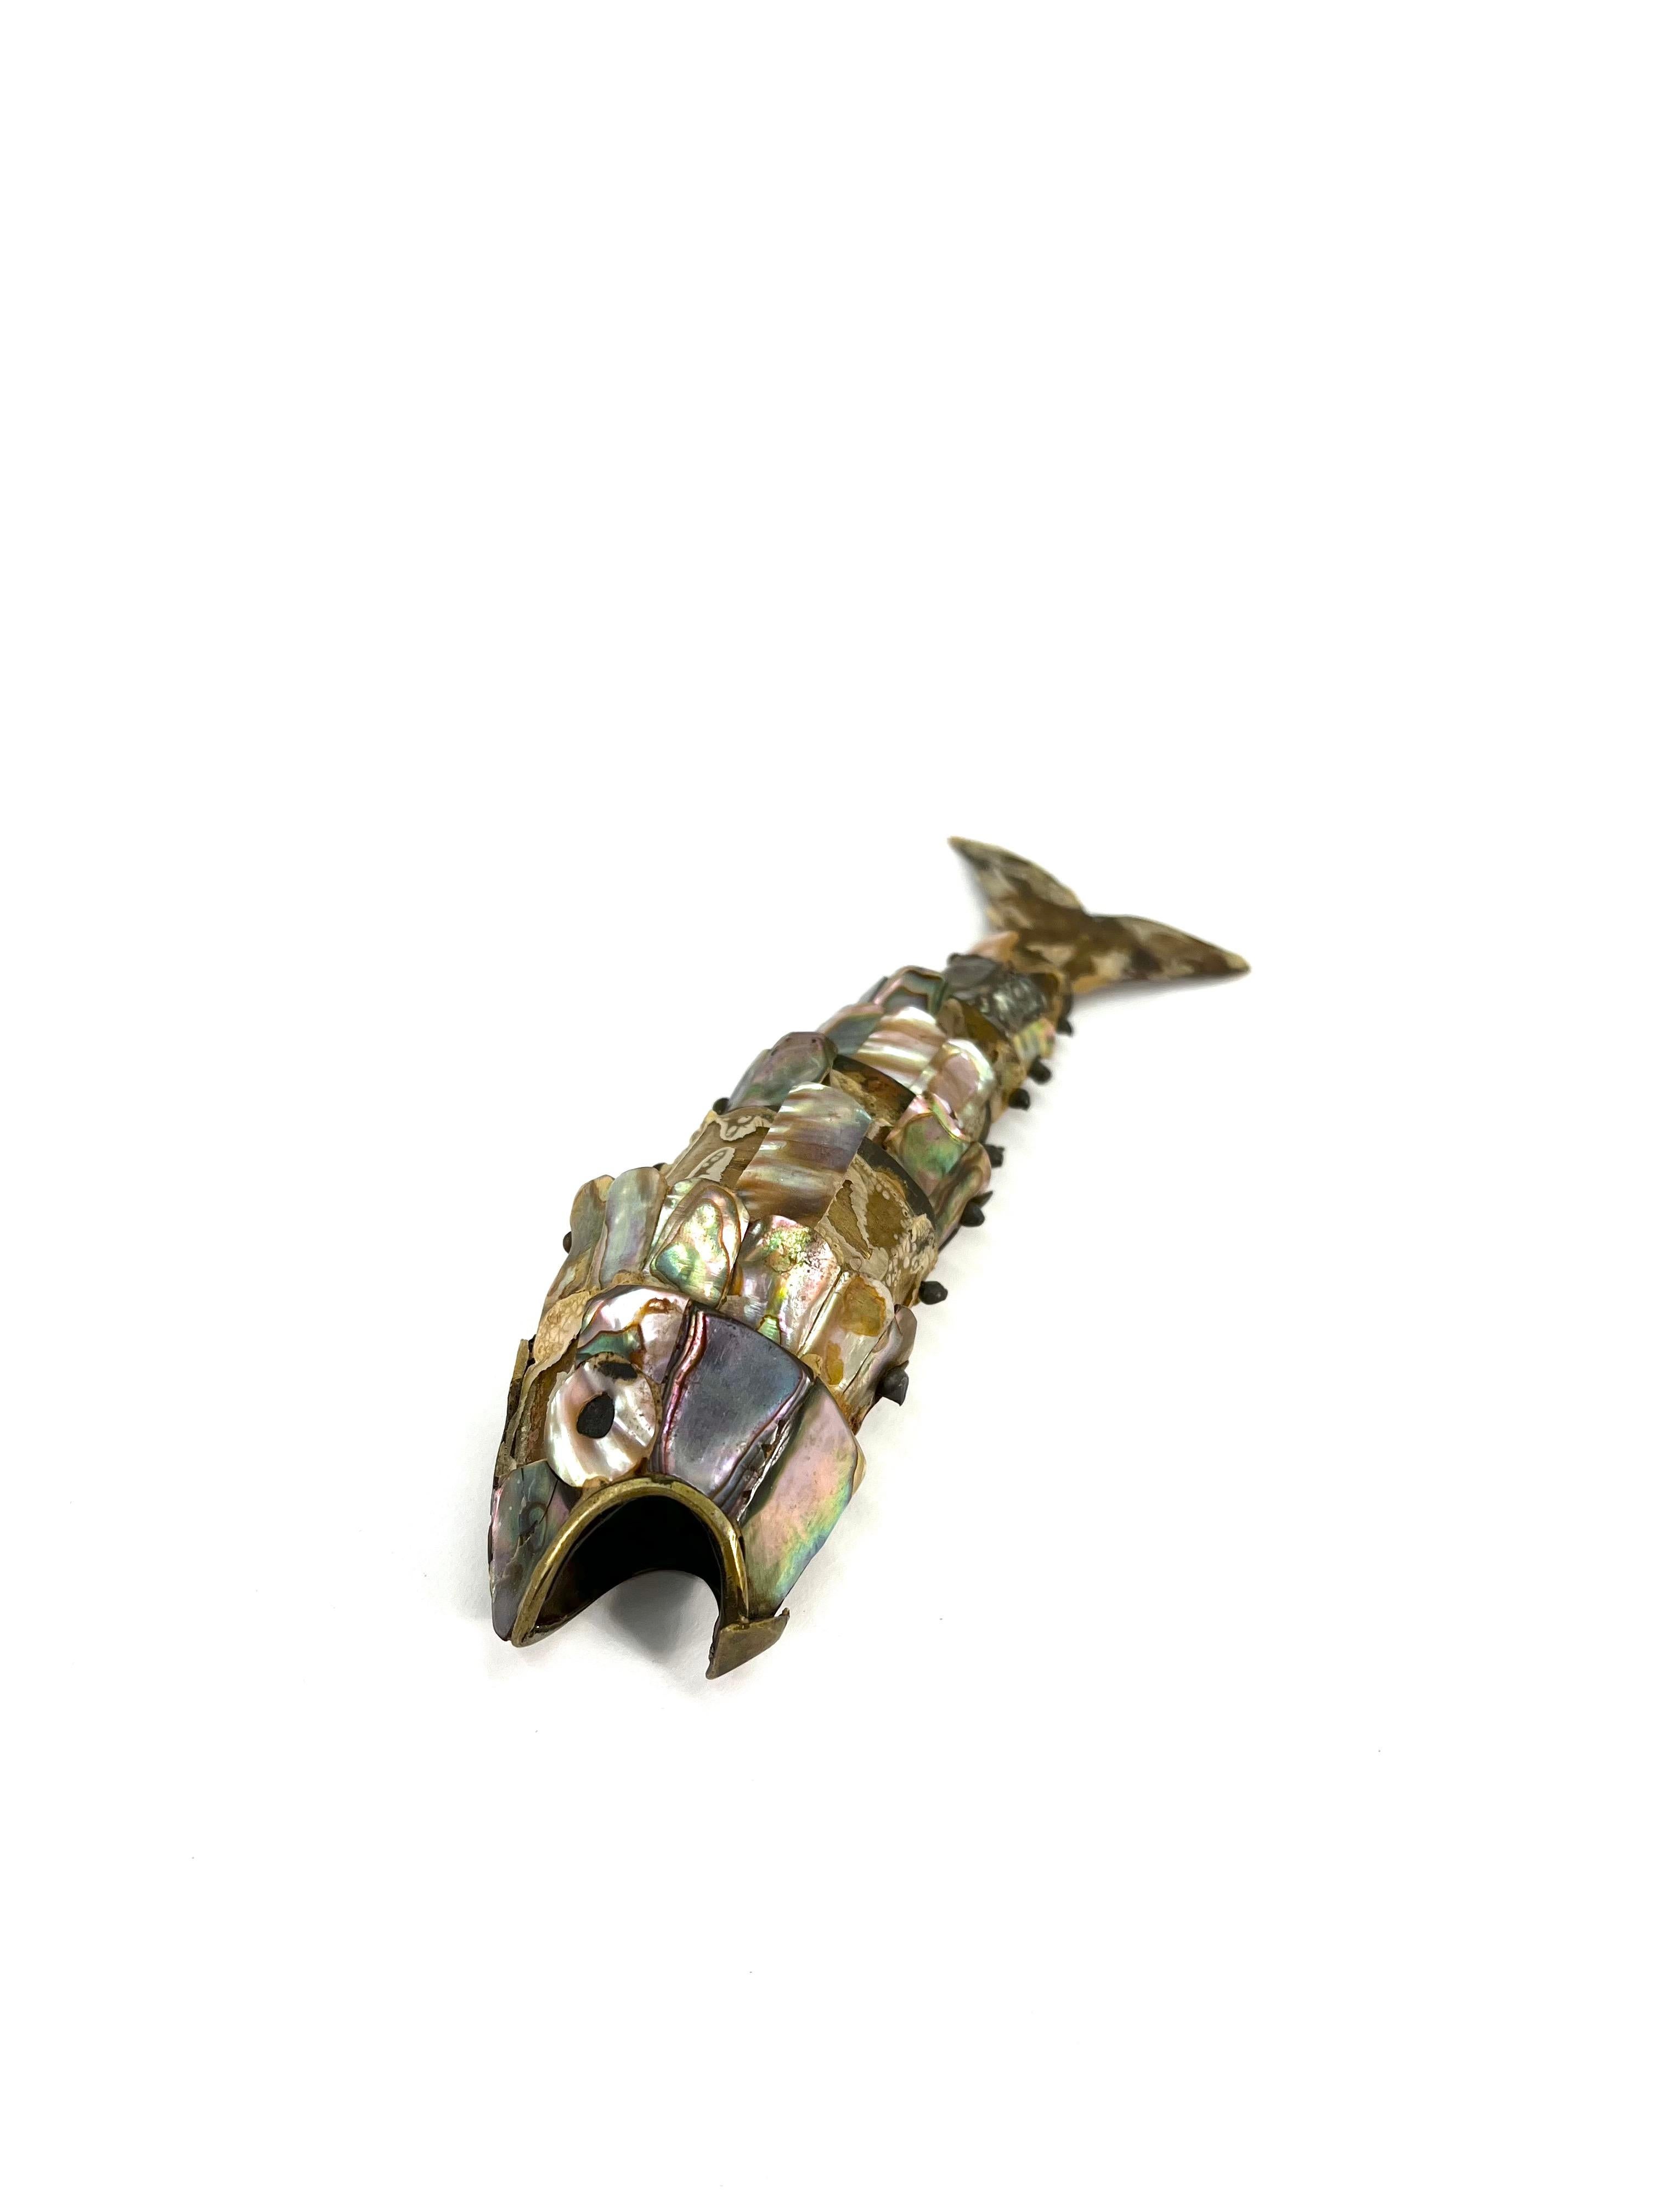 Mexican Fish Bottle Opener with Abalone Shells 1